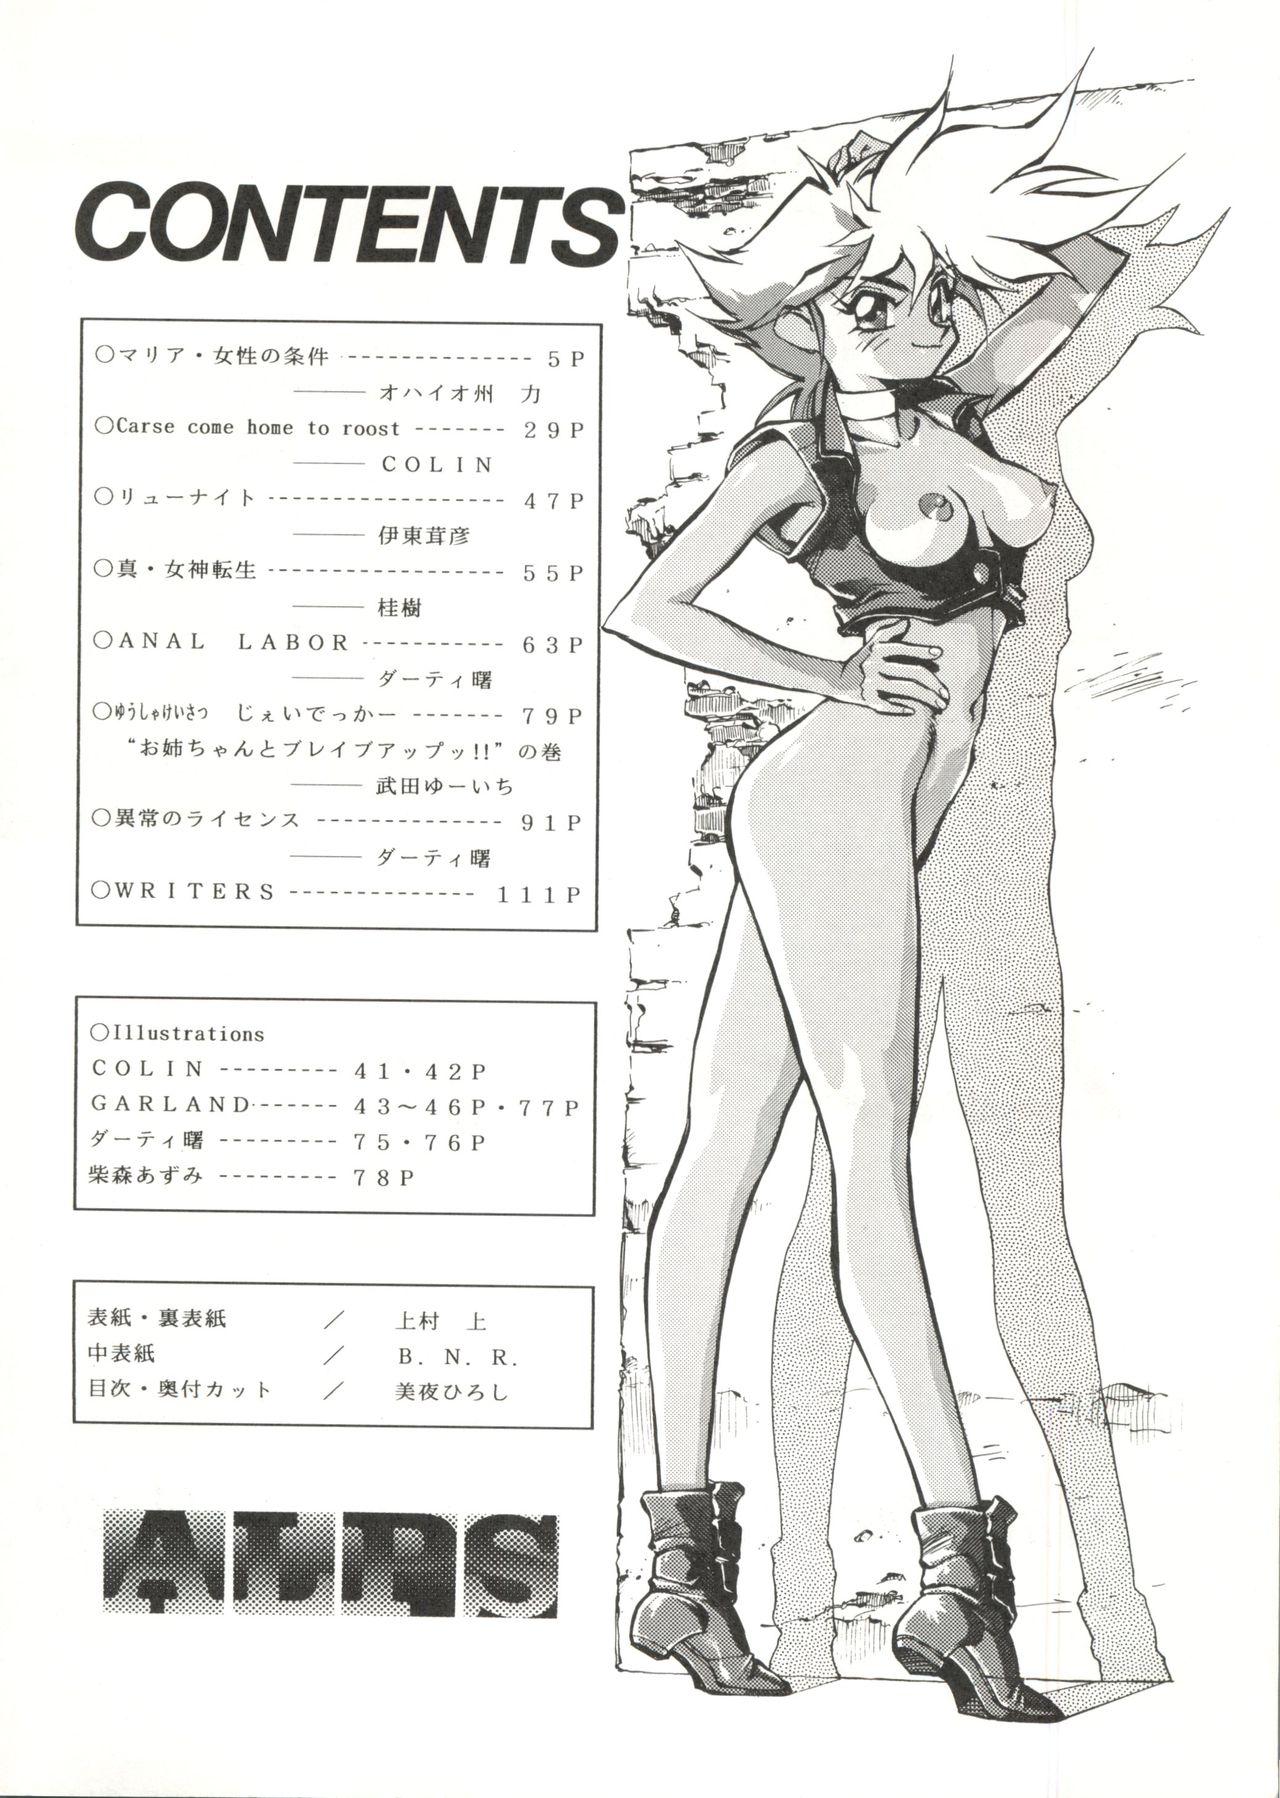 Stroking LOOK OUT 31 - Sailor moon Ghost sweeper mikami Lord of lords ryu knight Patlabor Brave police j decker Candid - Page 3